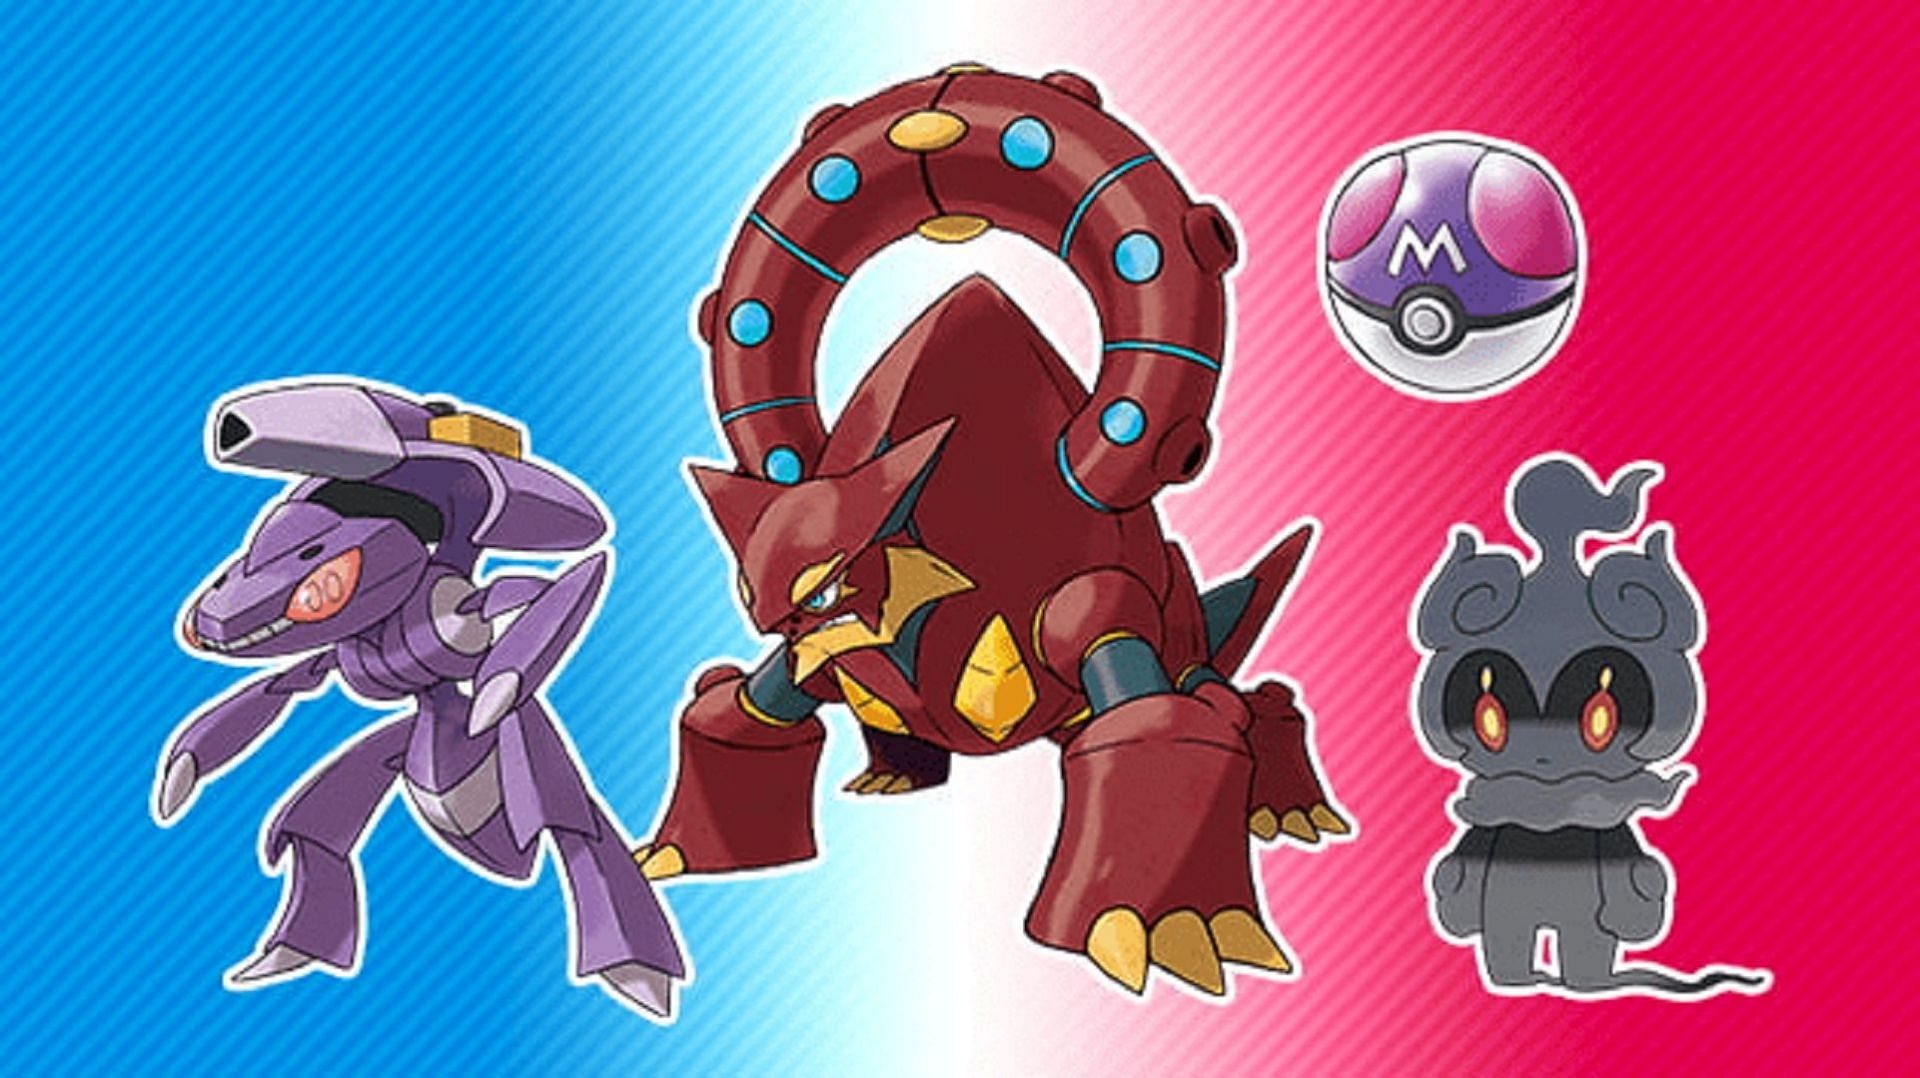 Three Mythic Pokemon can be yours in an upcoming promotion for Sword and Shield (Image via The Pokemon Company)